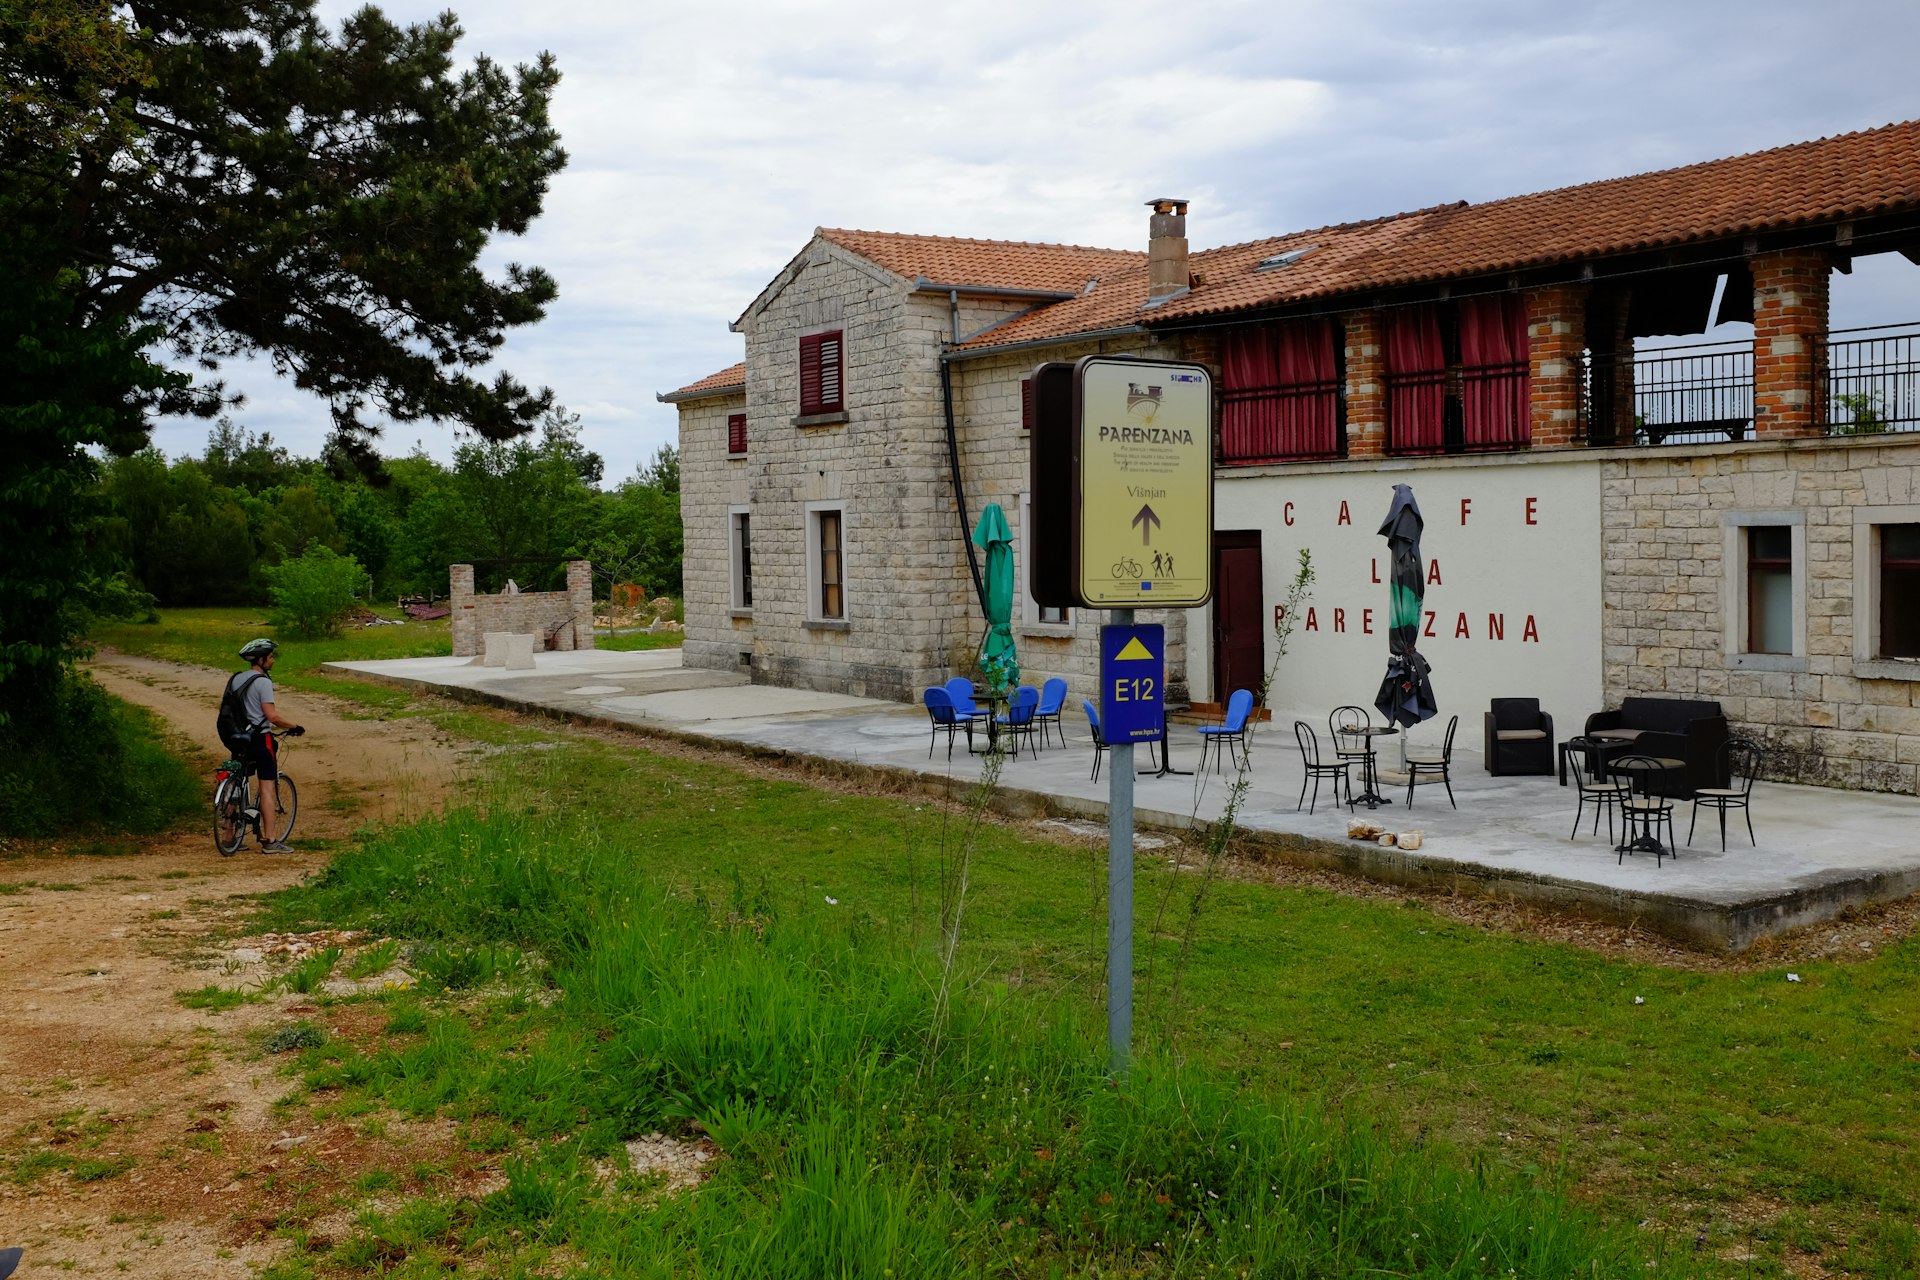 A cyclist stops on a dirt track of the Parenzana trail to glance at a former train station and siding that has been converted into a chic cafe. In the foreground is a sign indicating the track is the Parenzana trail for cyclists and trekkers